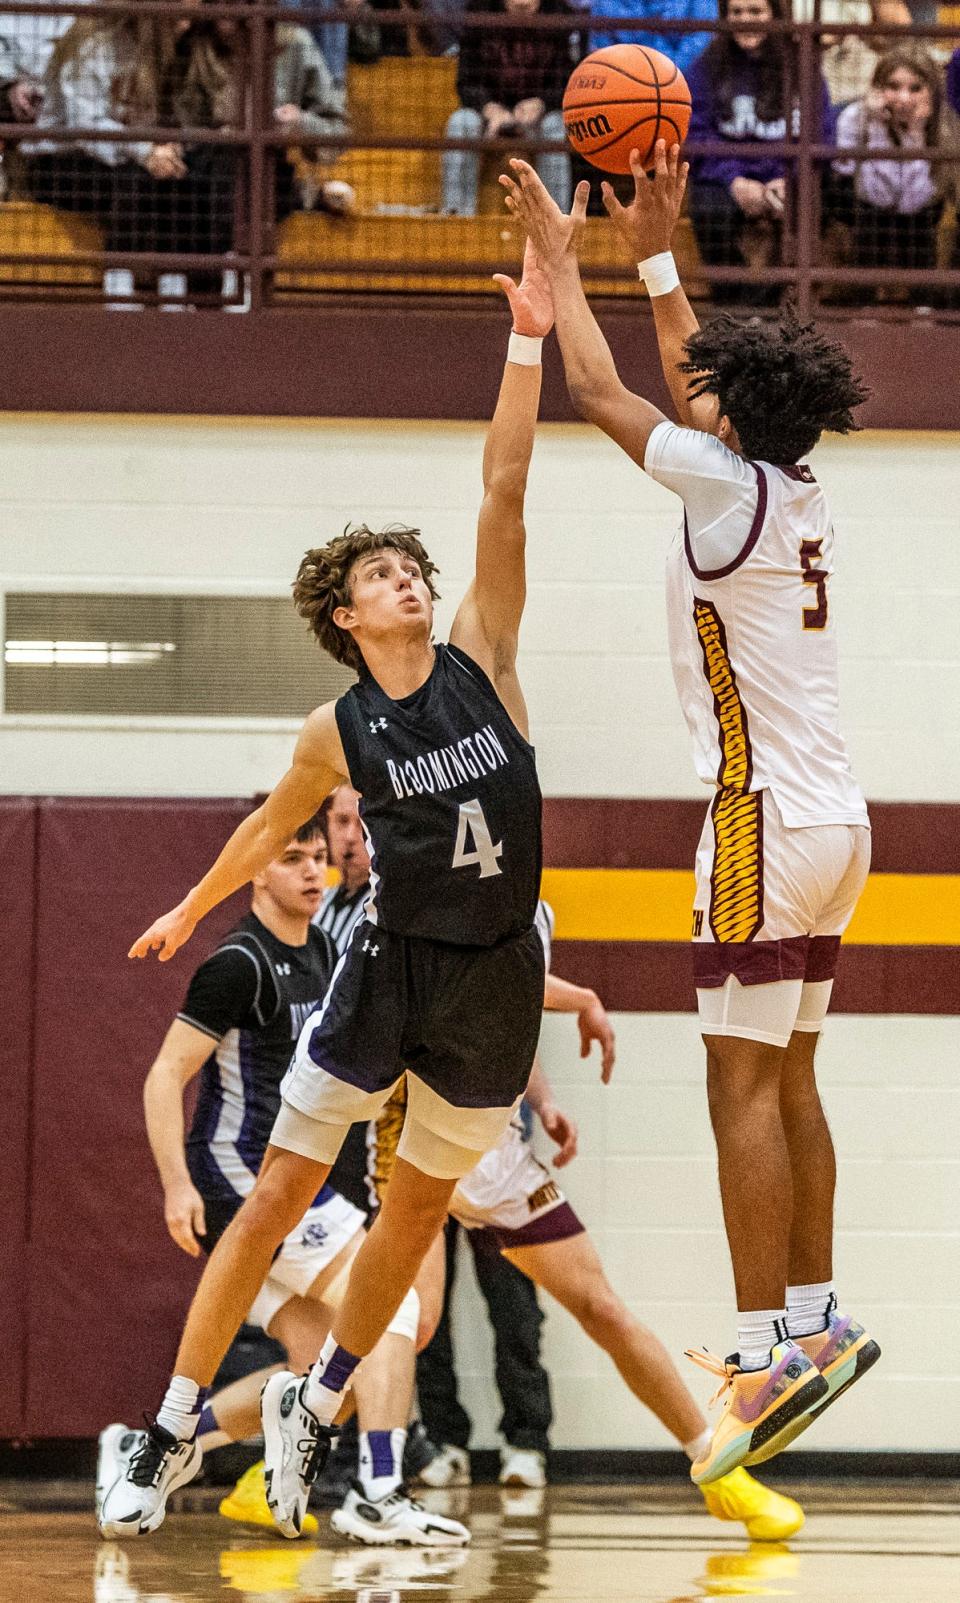 North's Jalen Williams (5) hits the game winning shot over South's Alex Shaevitz (4) during overtime of the Bloomington North versus Bloomington South boys basketball game at Bloomington High School North on Friday, Jan. 5, 2024. North won the game 56-53.